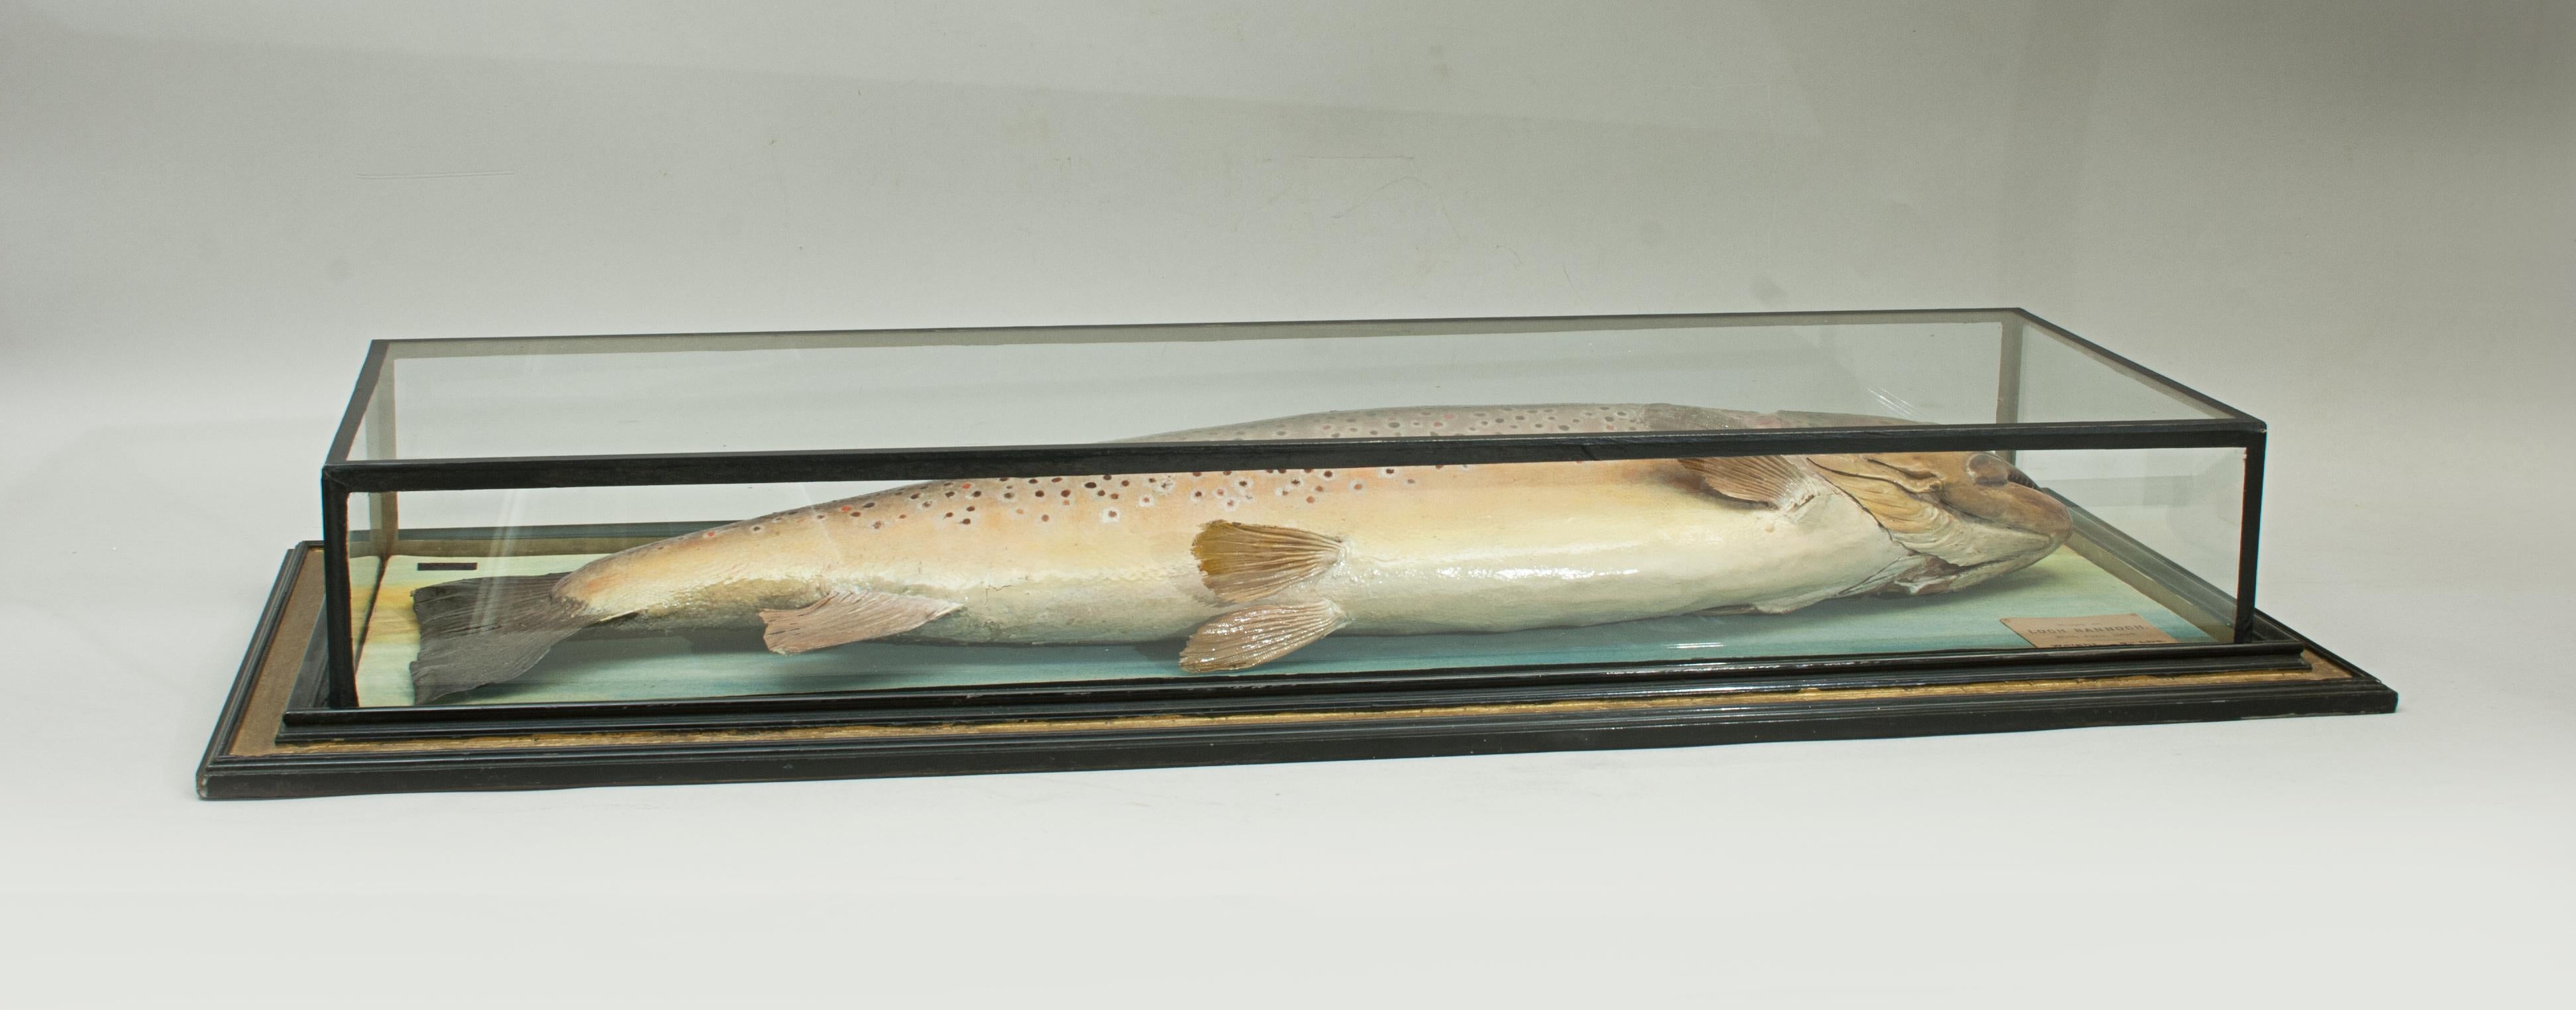 Trophy Fish Model of a Brown Trout by Malloch 1